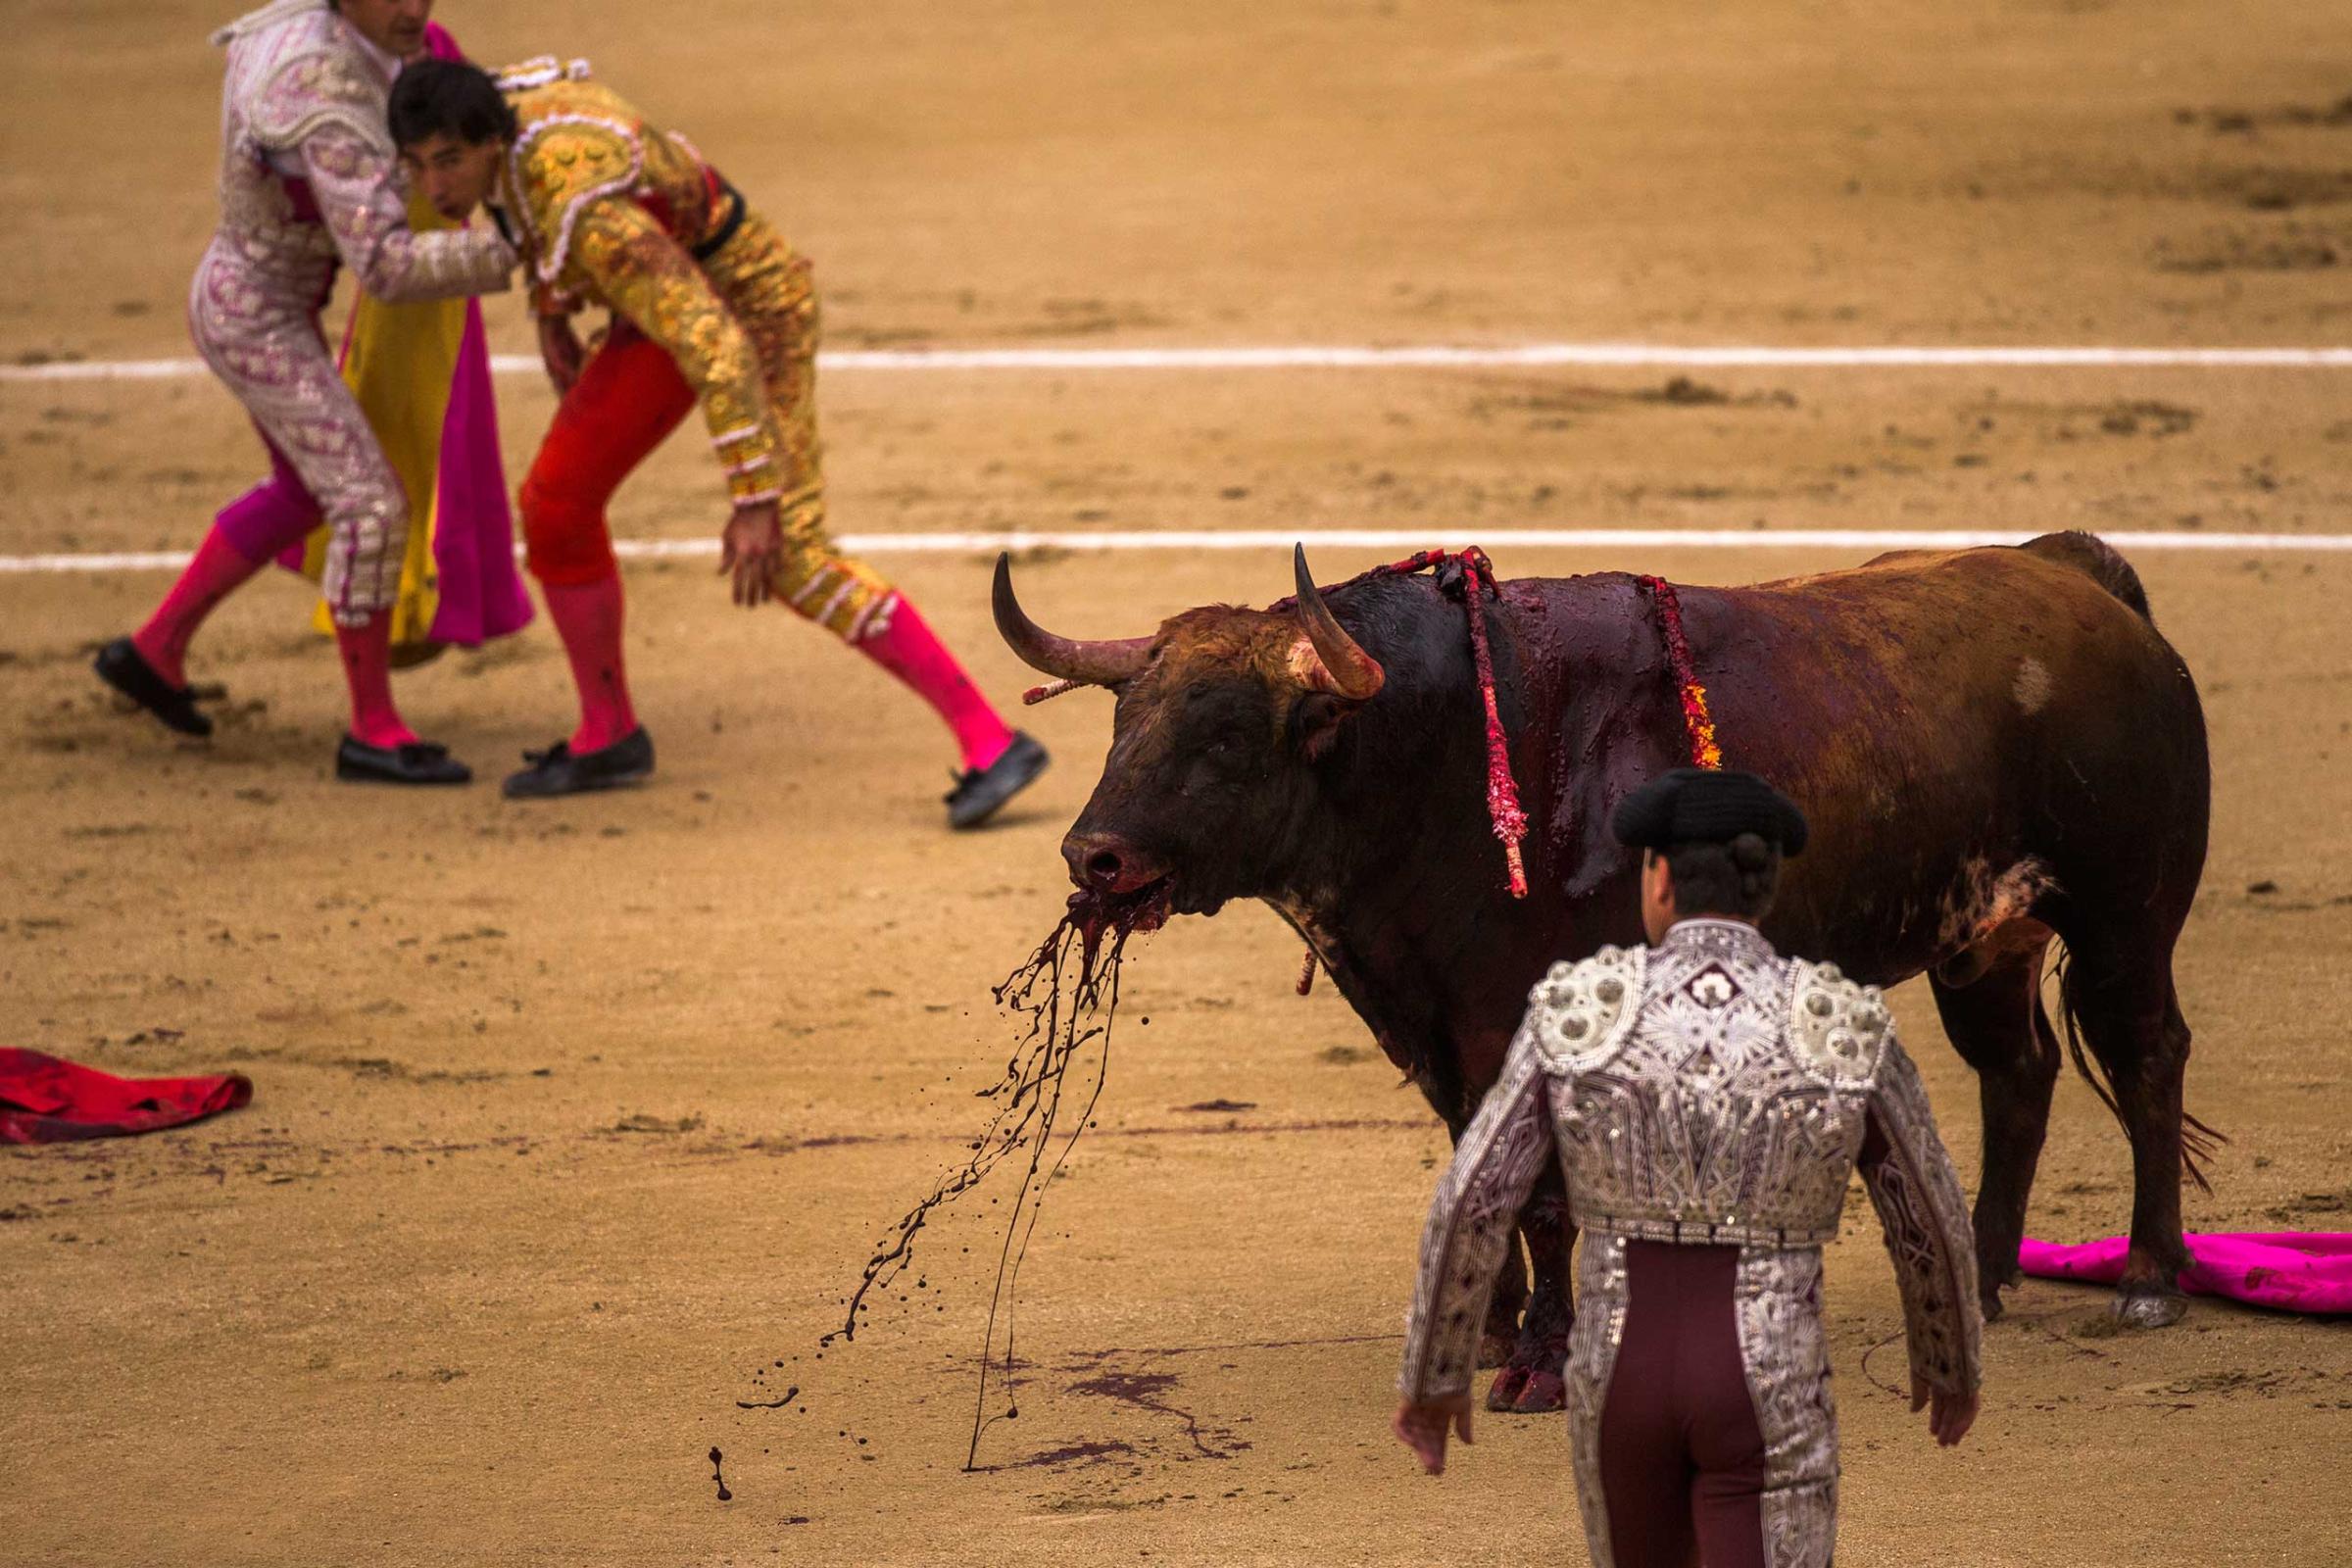 Spanish bullfighter Jimenez Fortes, top second left, kills a Los Chospes ranch fighting bull after being tossed by the bull during a bullfight at Las Ventas bullring in Madrid, Spain, May 20, 2014.